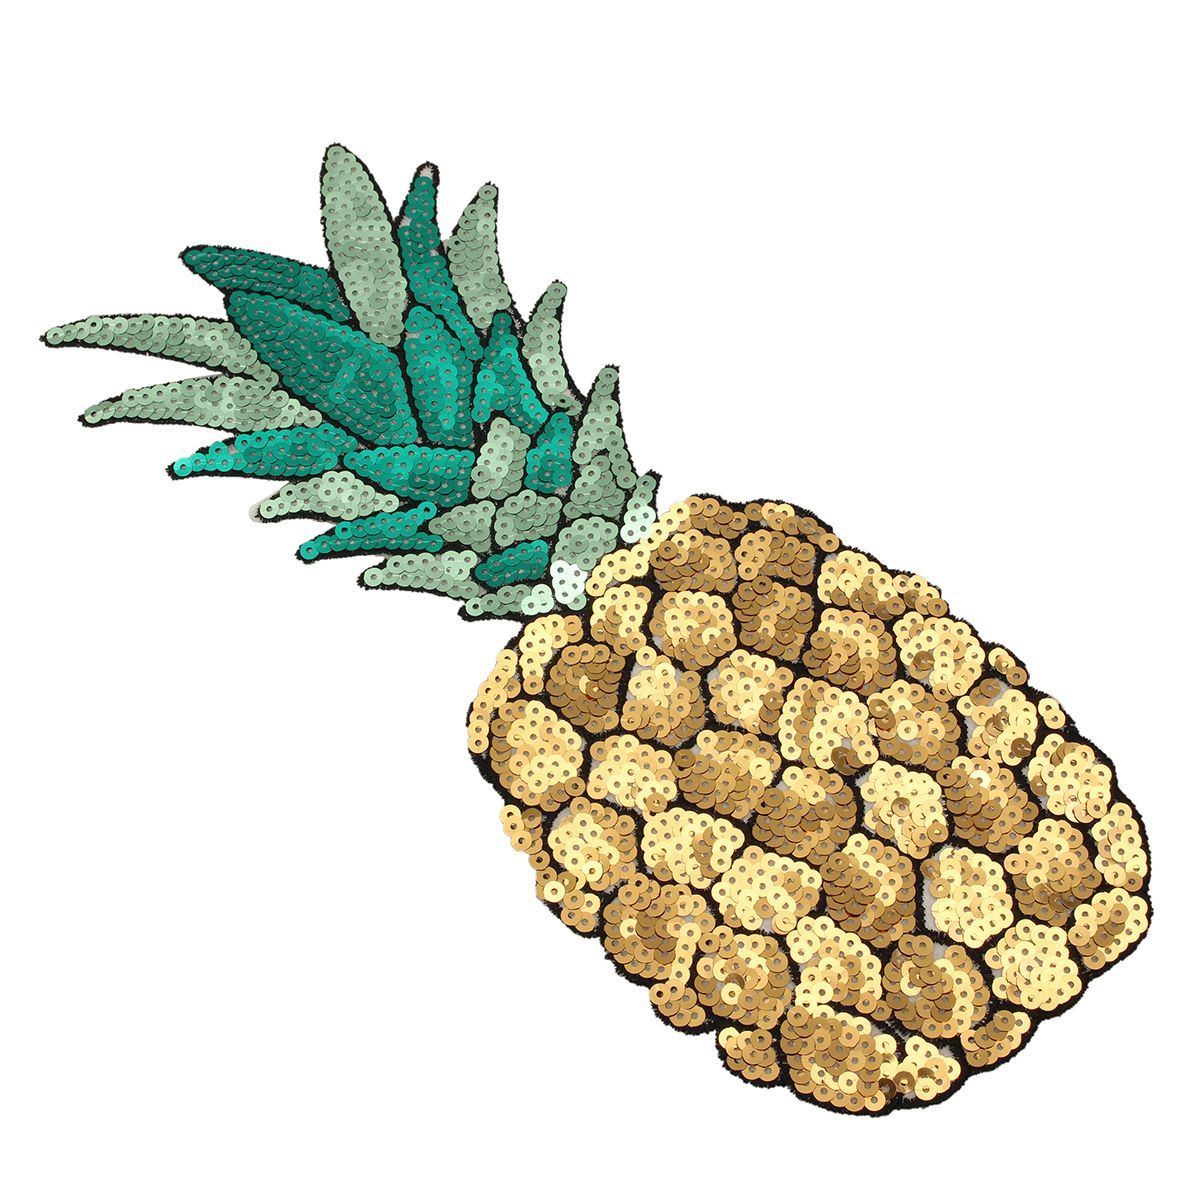 2Pcs-Sequined-Pineapple-Embroidery-Iron-On-Patch-Badge-Sew-Craft-Clothes-Applique-Decorations-1461083